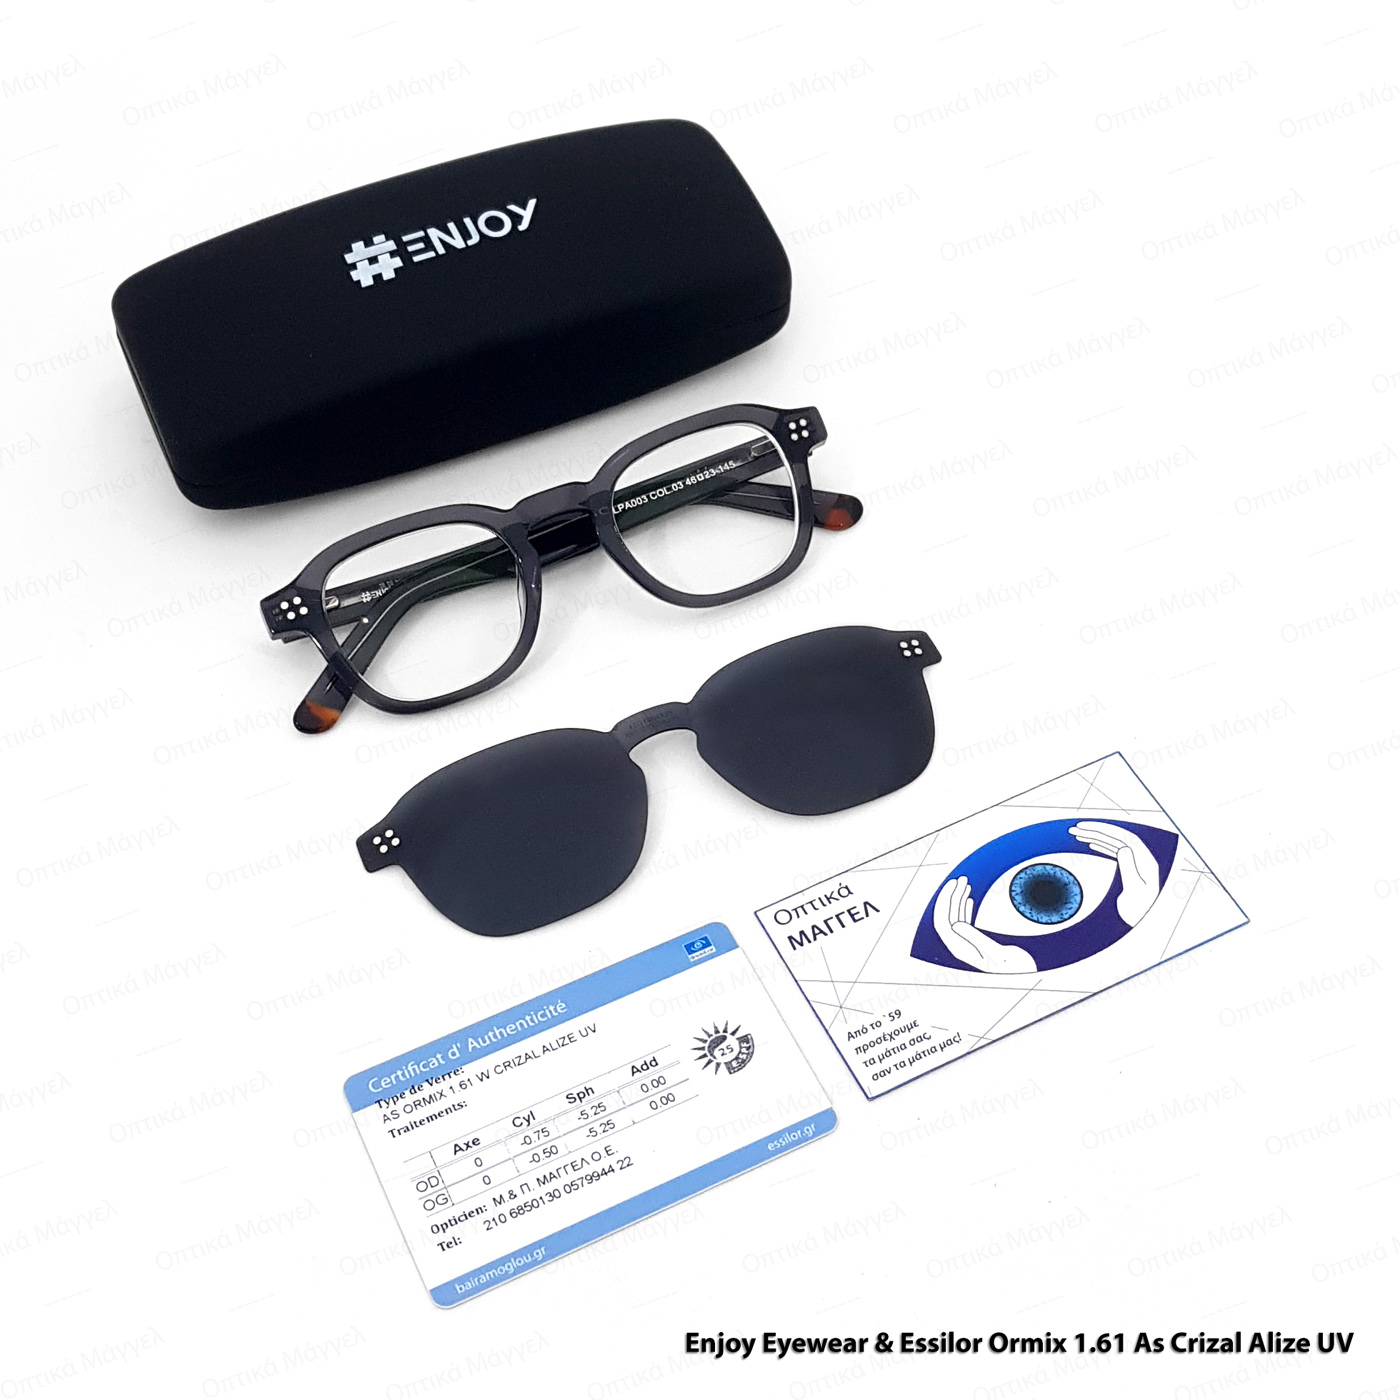 Enjoy Eyewear with Clip-On & Essilor Ormix 1,60 As Alize!